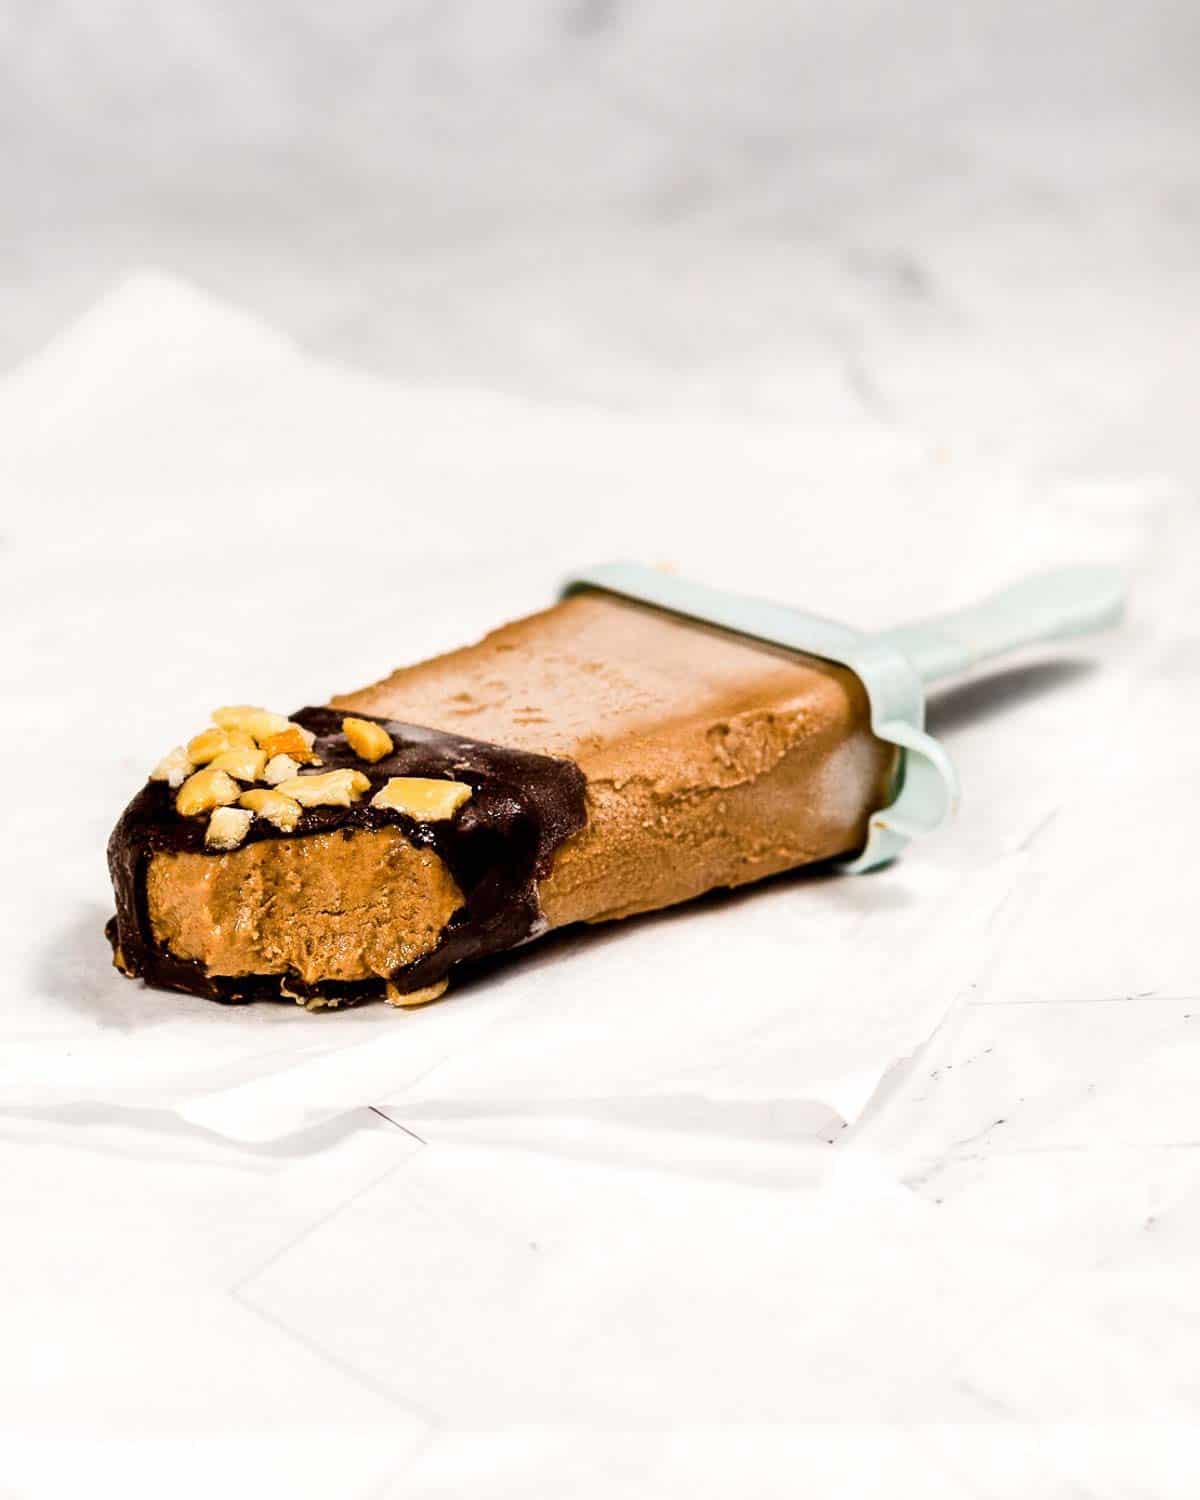 A chocolate ice cream bar dipped in chocolate and peanuts on parchment paper. A bite is missing.